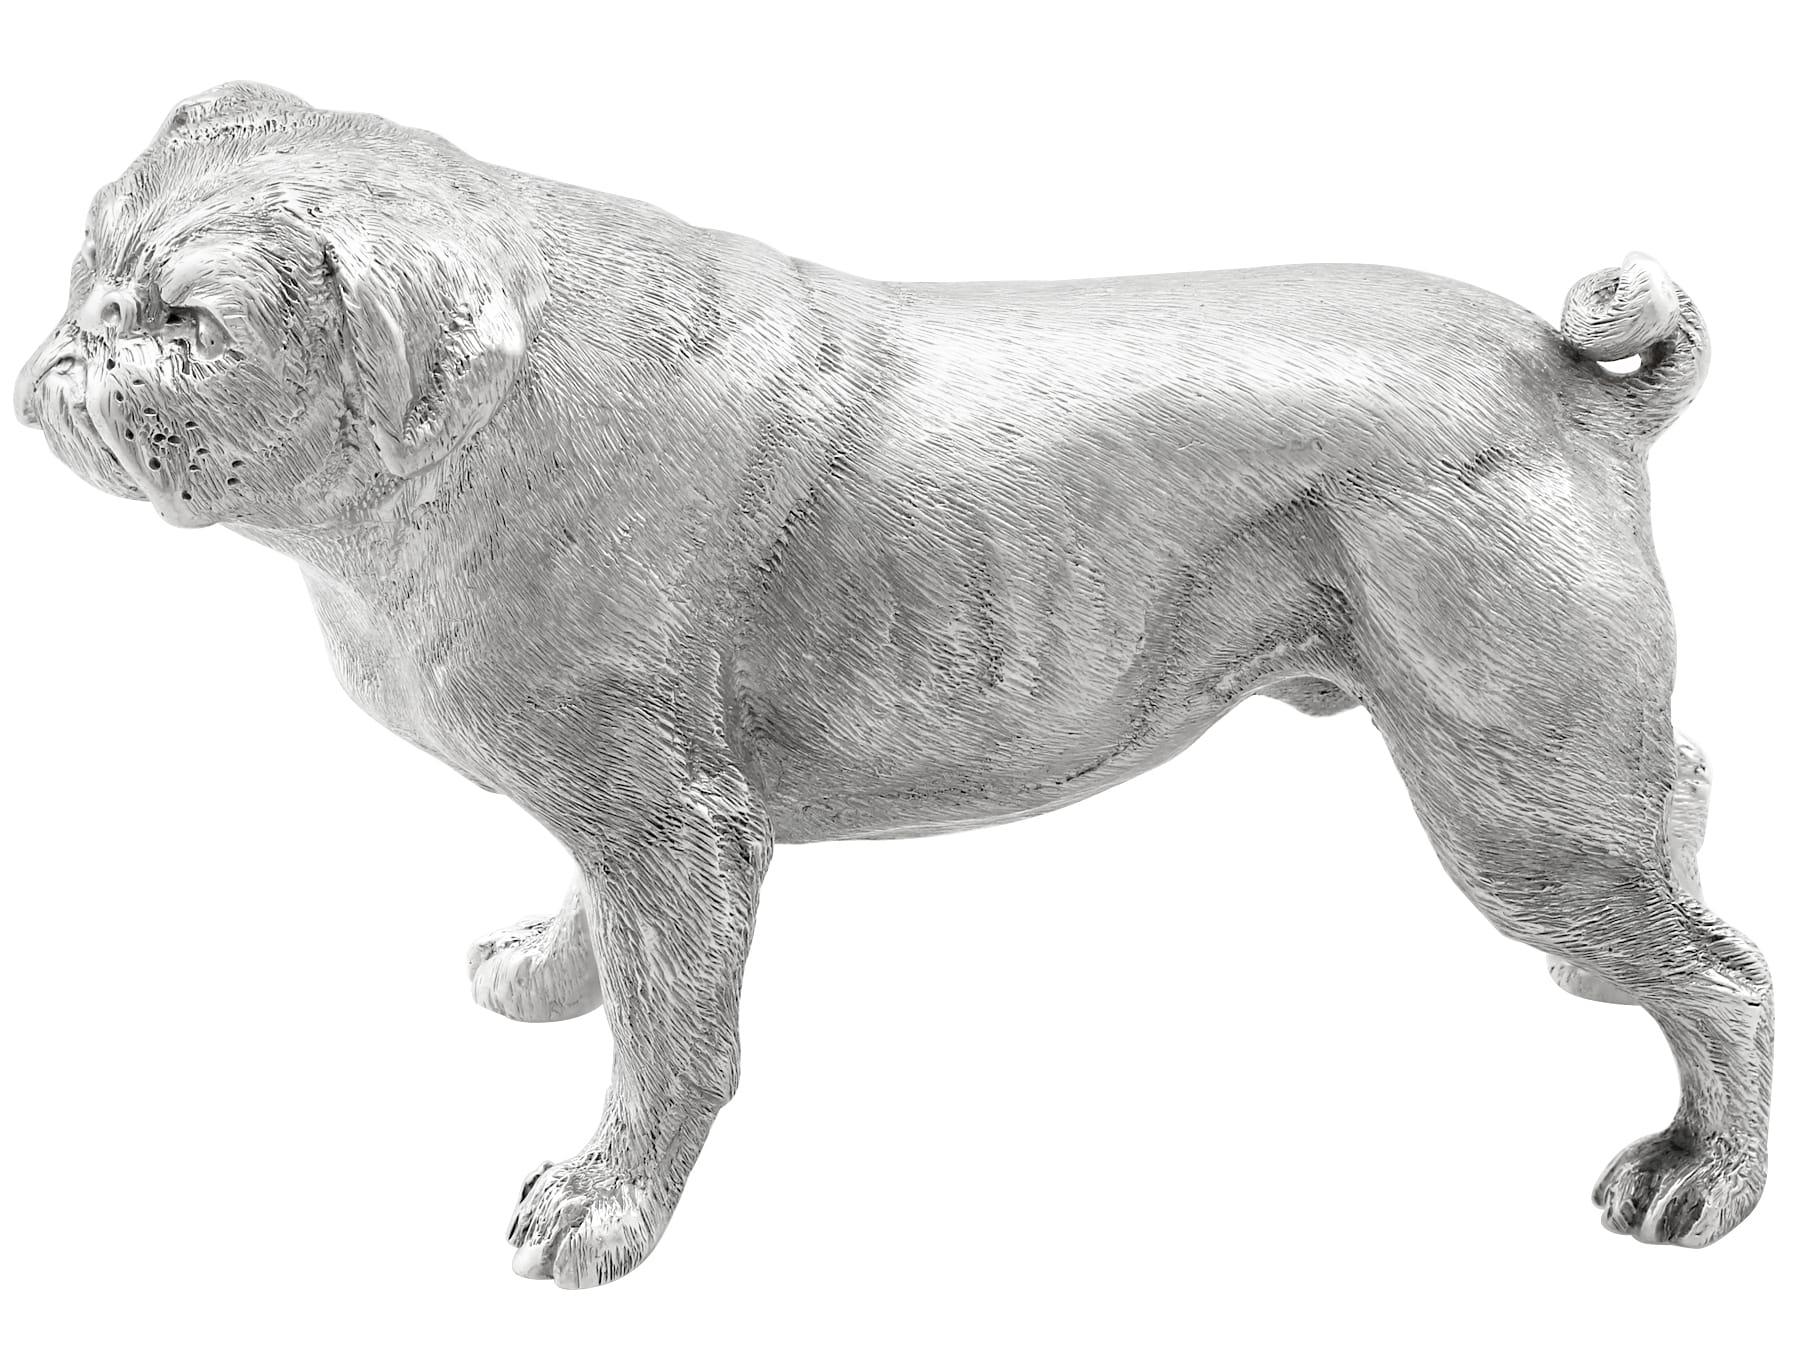 An exceptional, fine and impressive contemporary cast English sterling silver model of a pug; part of our animal related silverware collection.

This exceptional contemporary cast sterling silver ornament has been realistically modelled in the